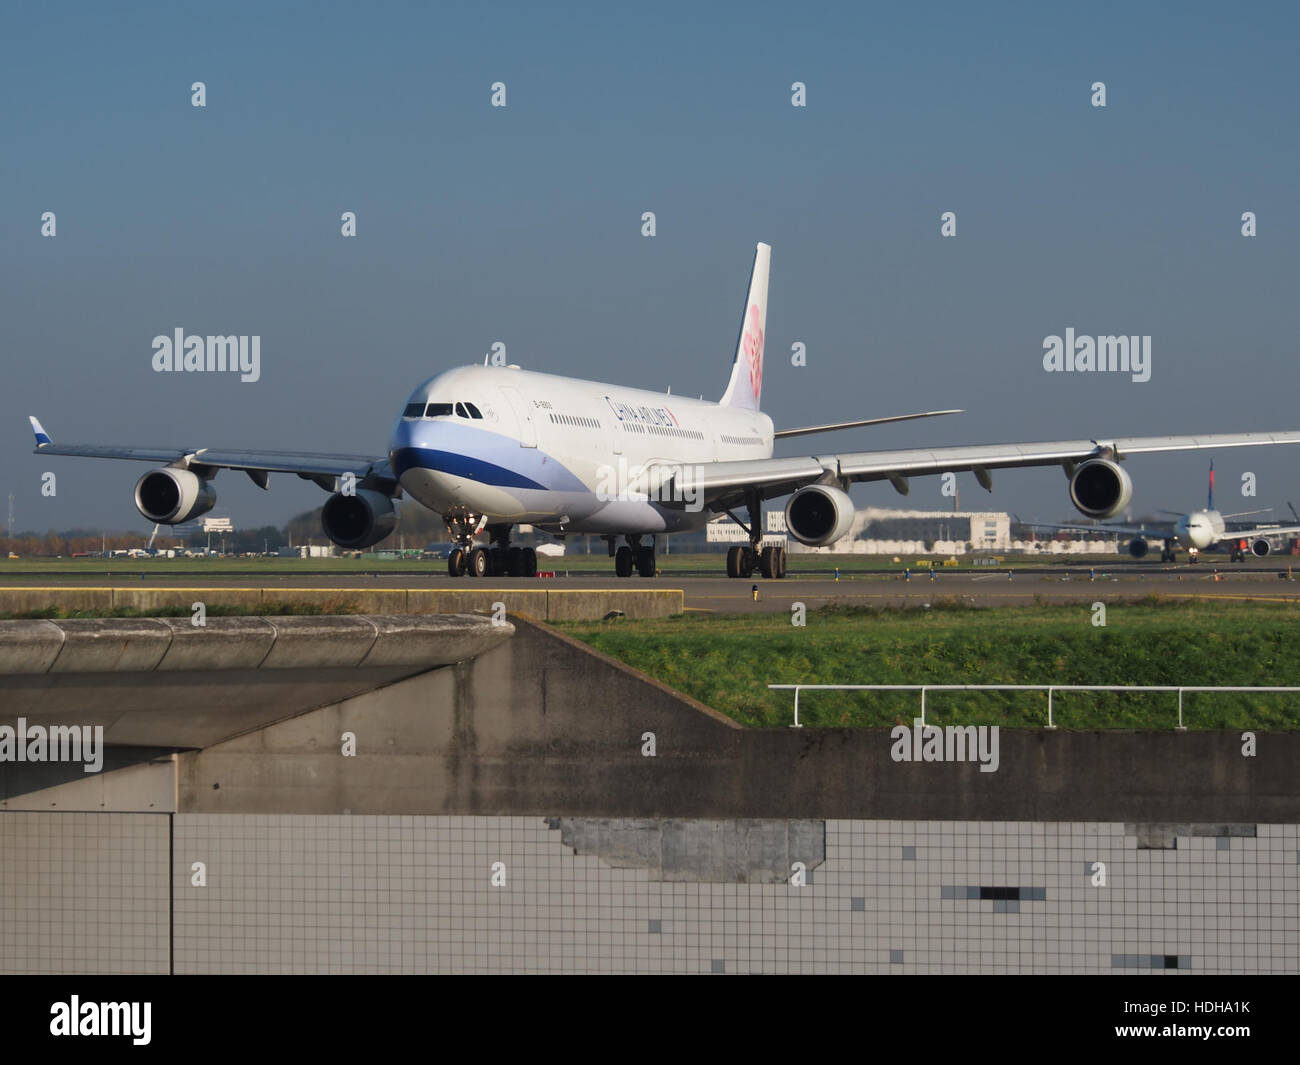 B-18805 (aeromobili) China Airlines Airbus A340-313 - CN 415 a Schiphol pic1 Foto Stock